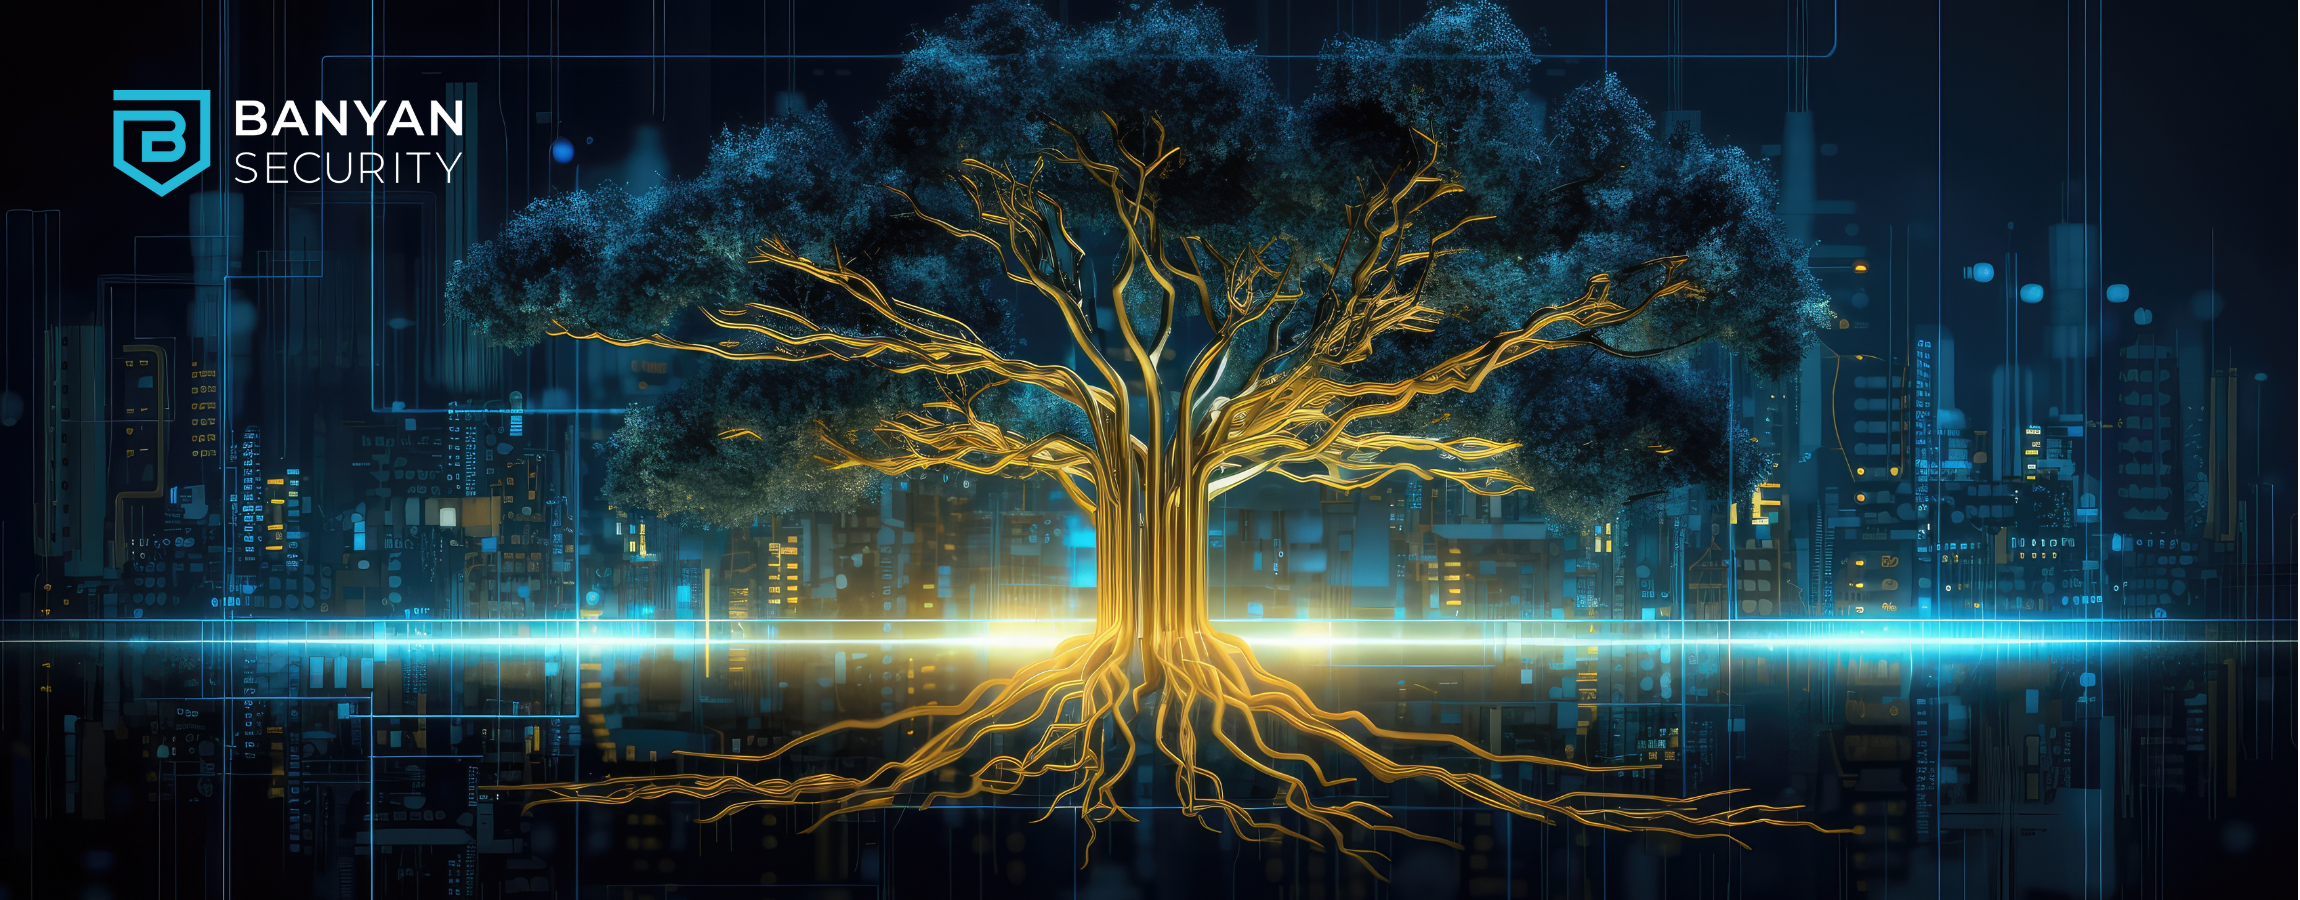 Microsoft and Banyan Security represented by a tree made of circuits